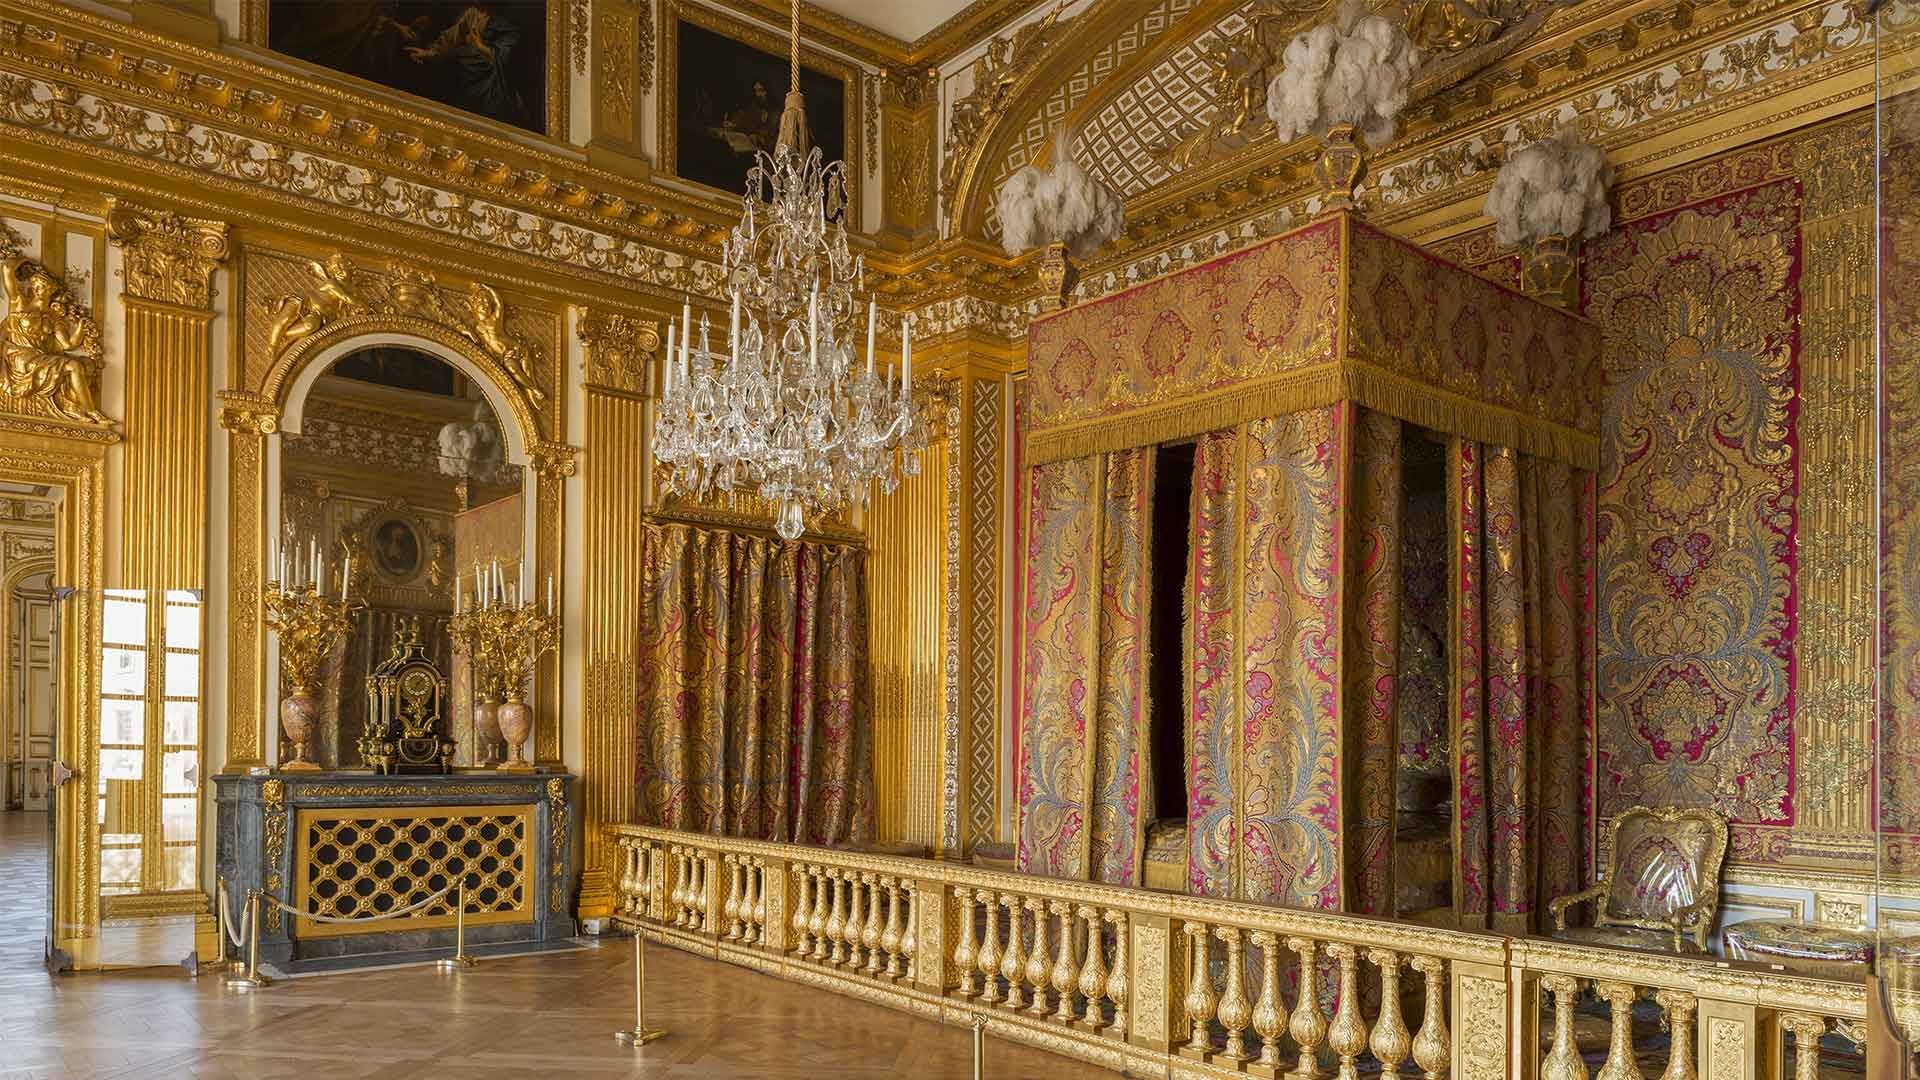 The King's Chamber Inside The Palace Of Versailles